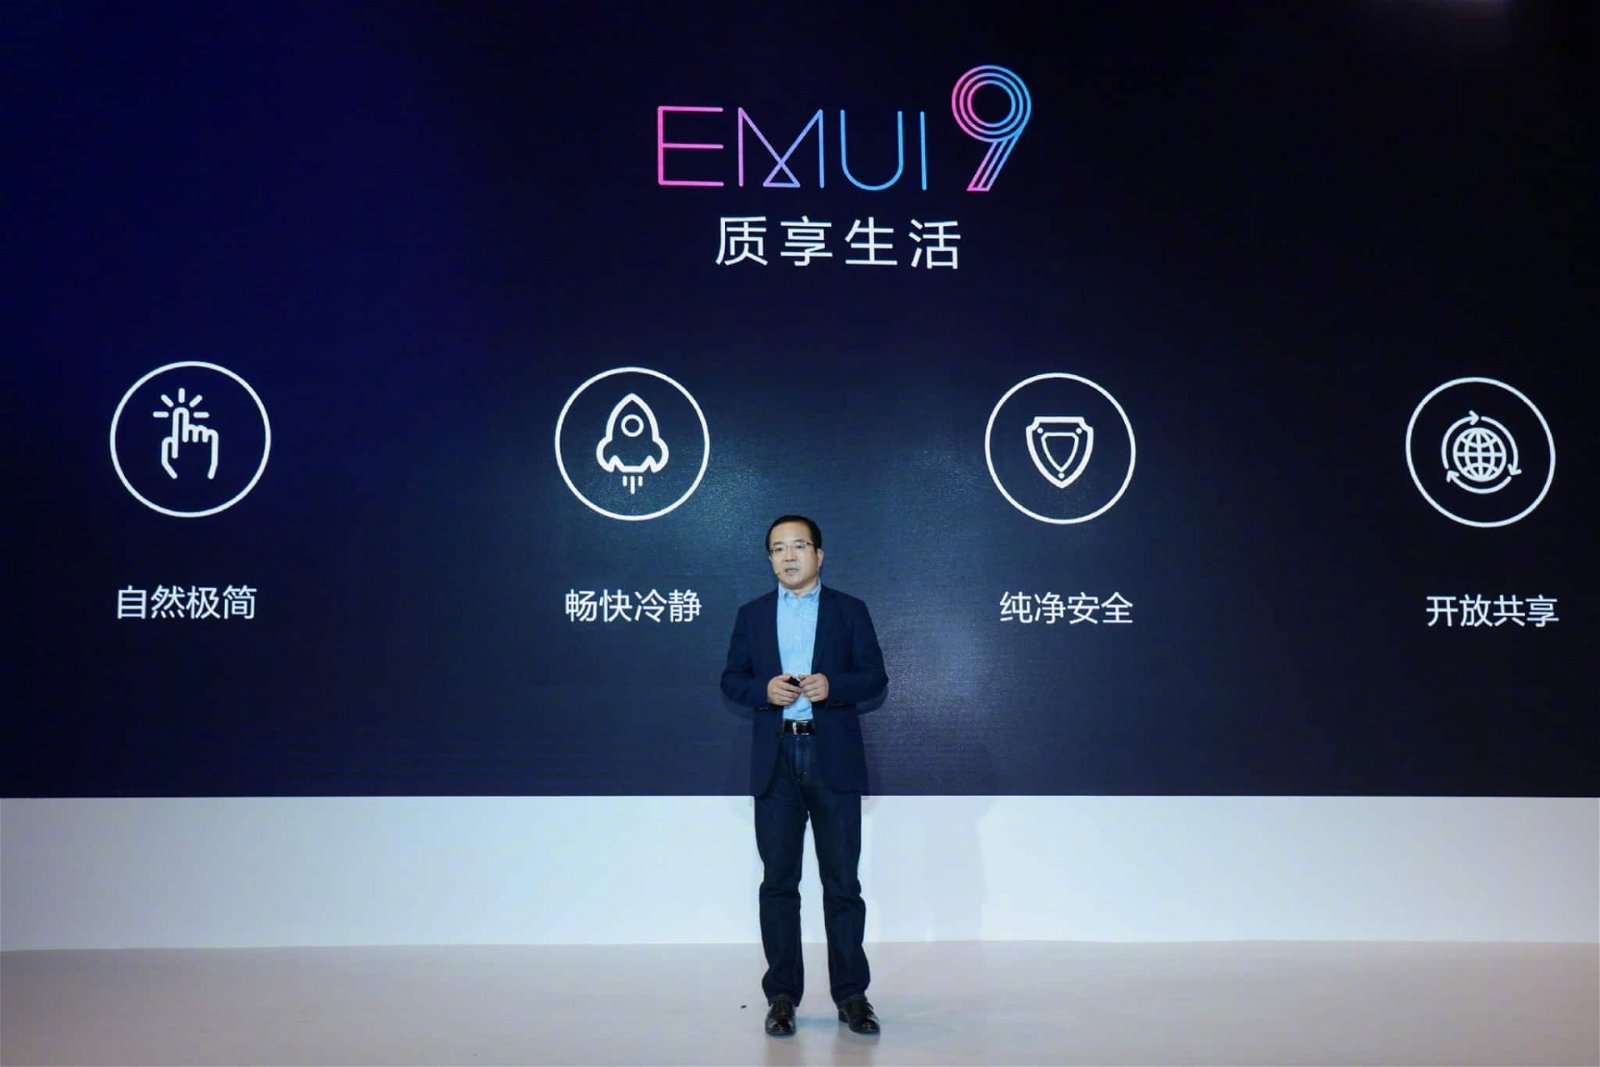 Chinese Phones Using EMUI 9 Now Unable to Use Third-Party Launchers